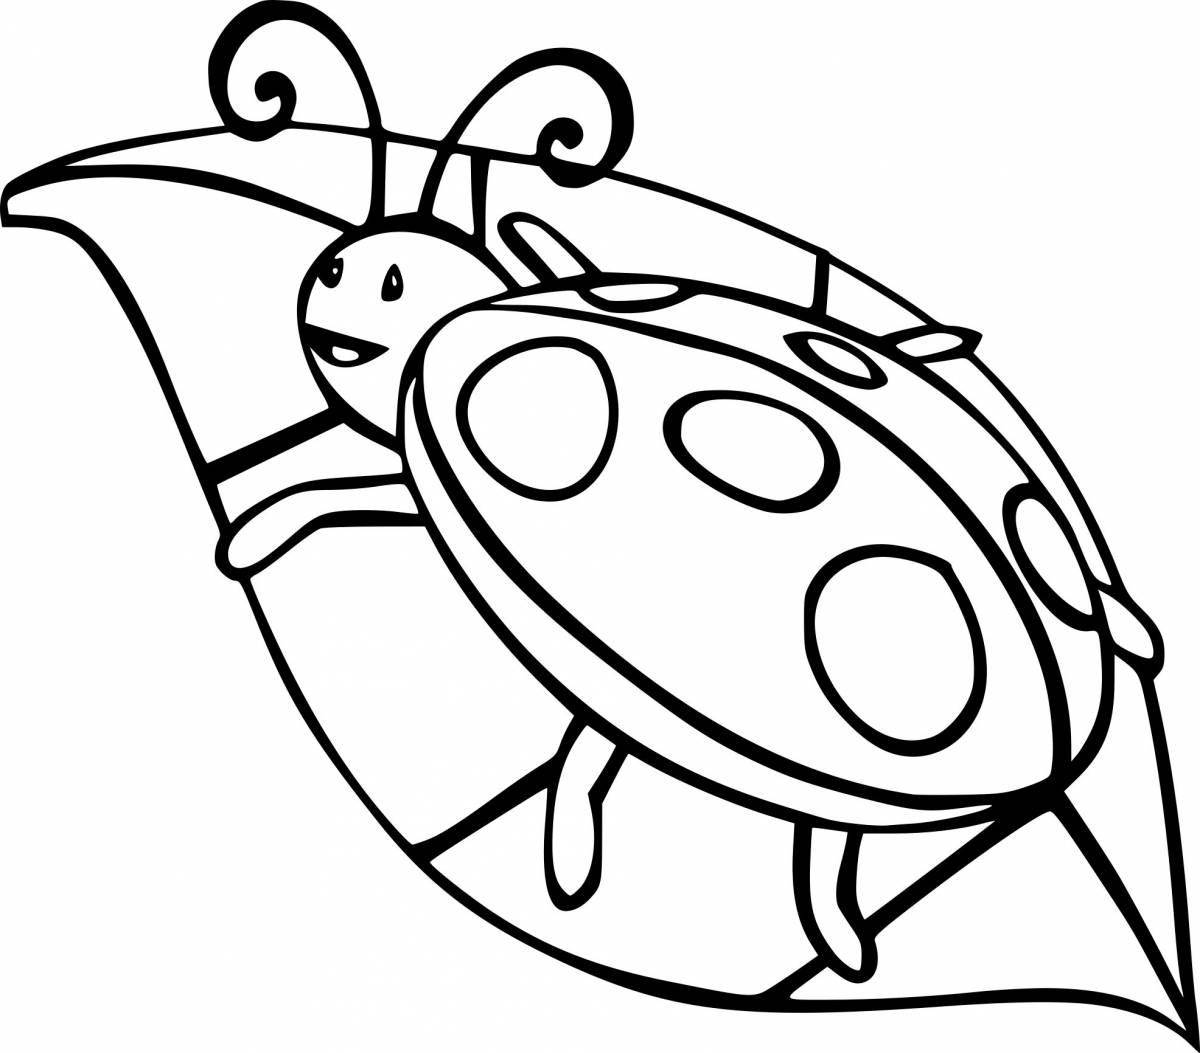 Mysterious insect coloring pages